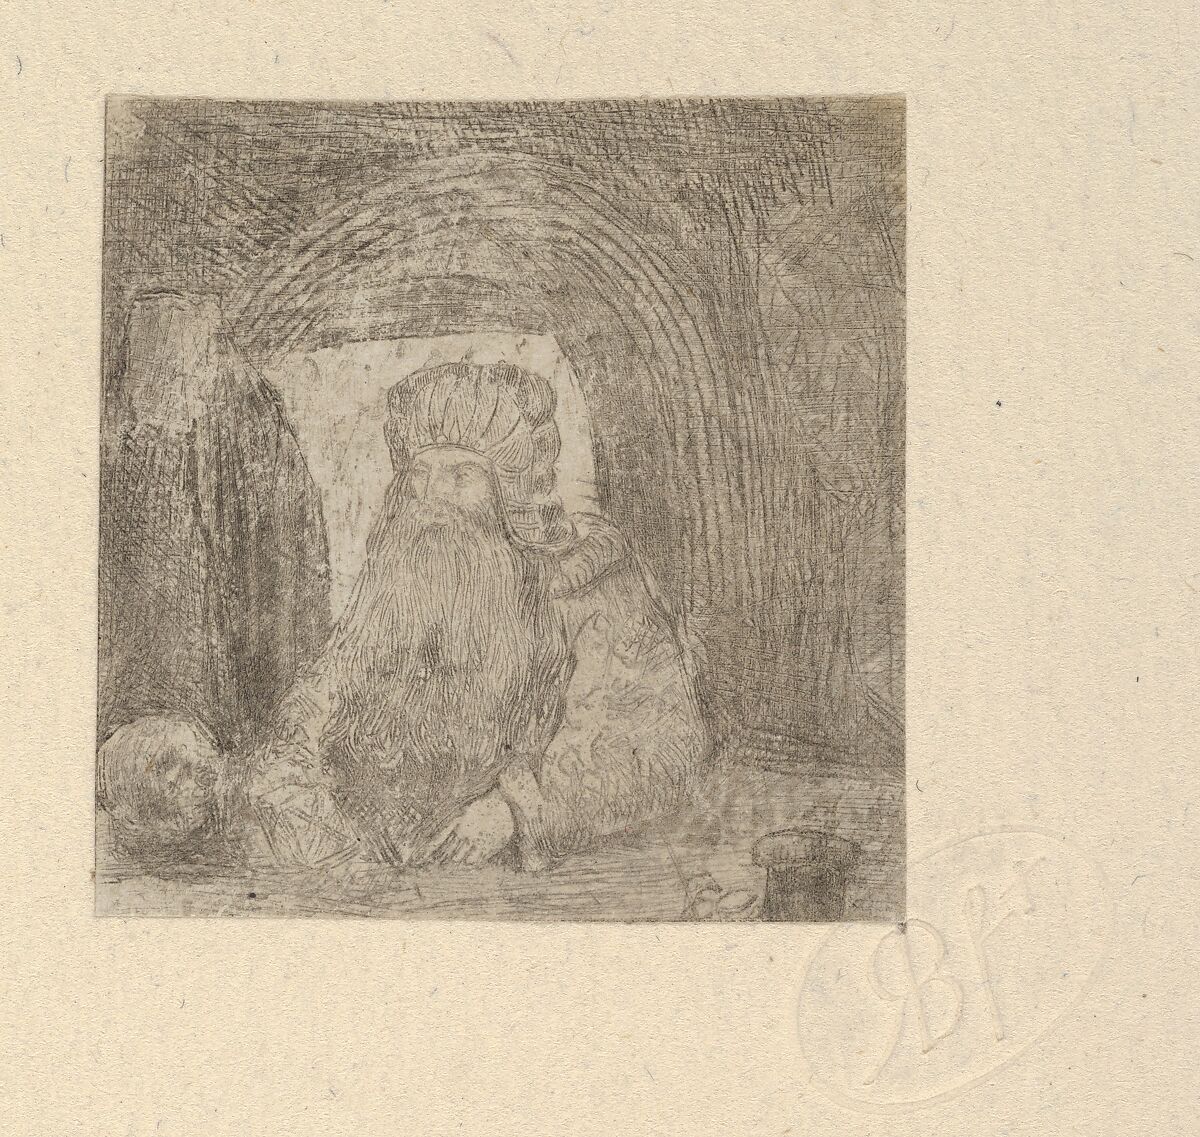 L'Ermite à la Tête de Mort (The Hermit with Skull), Rodolphe Bresdin (French, Montrelais 1822–1885 Sèvres), Etching; first state of two (Van Gelder) 